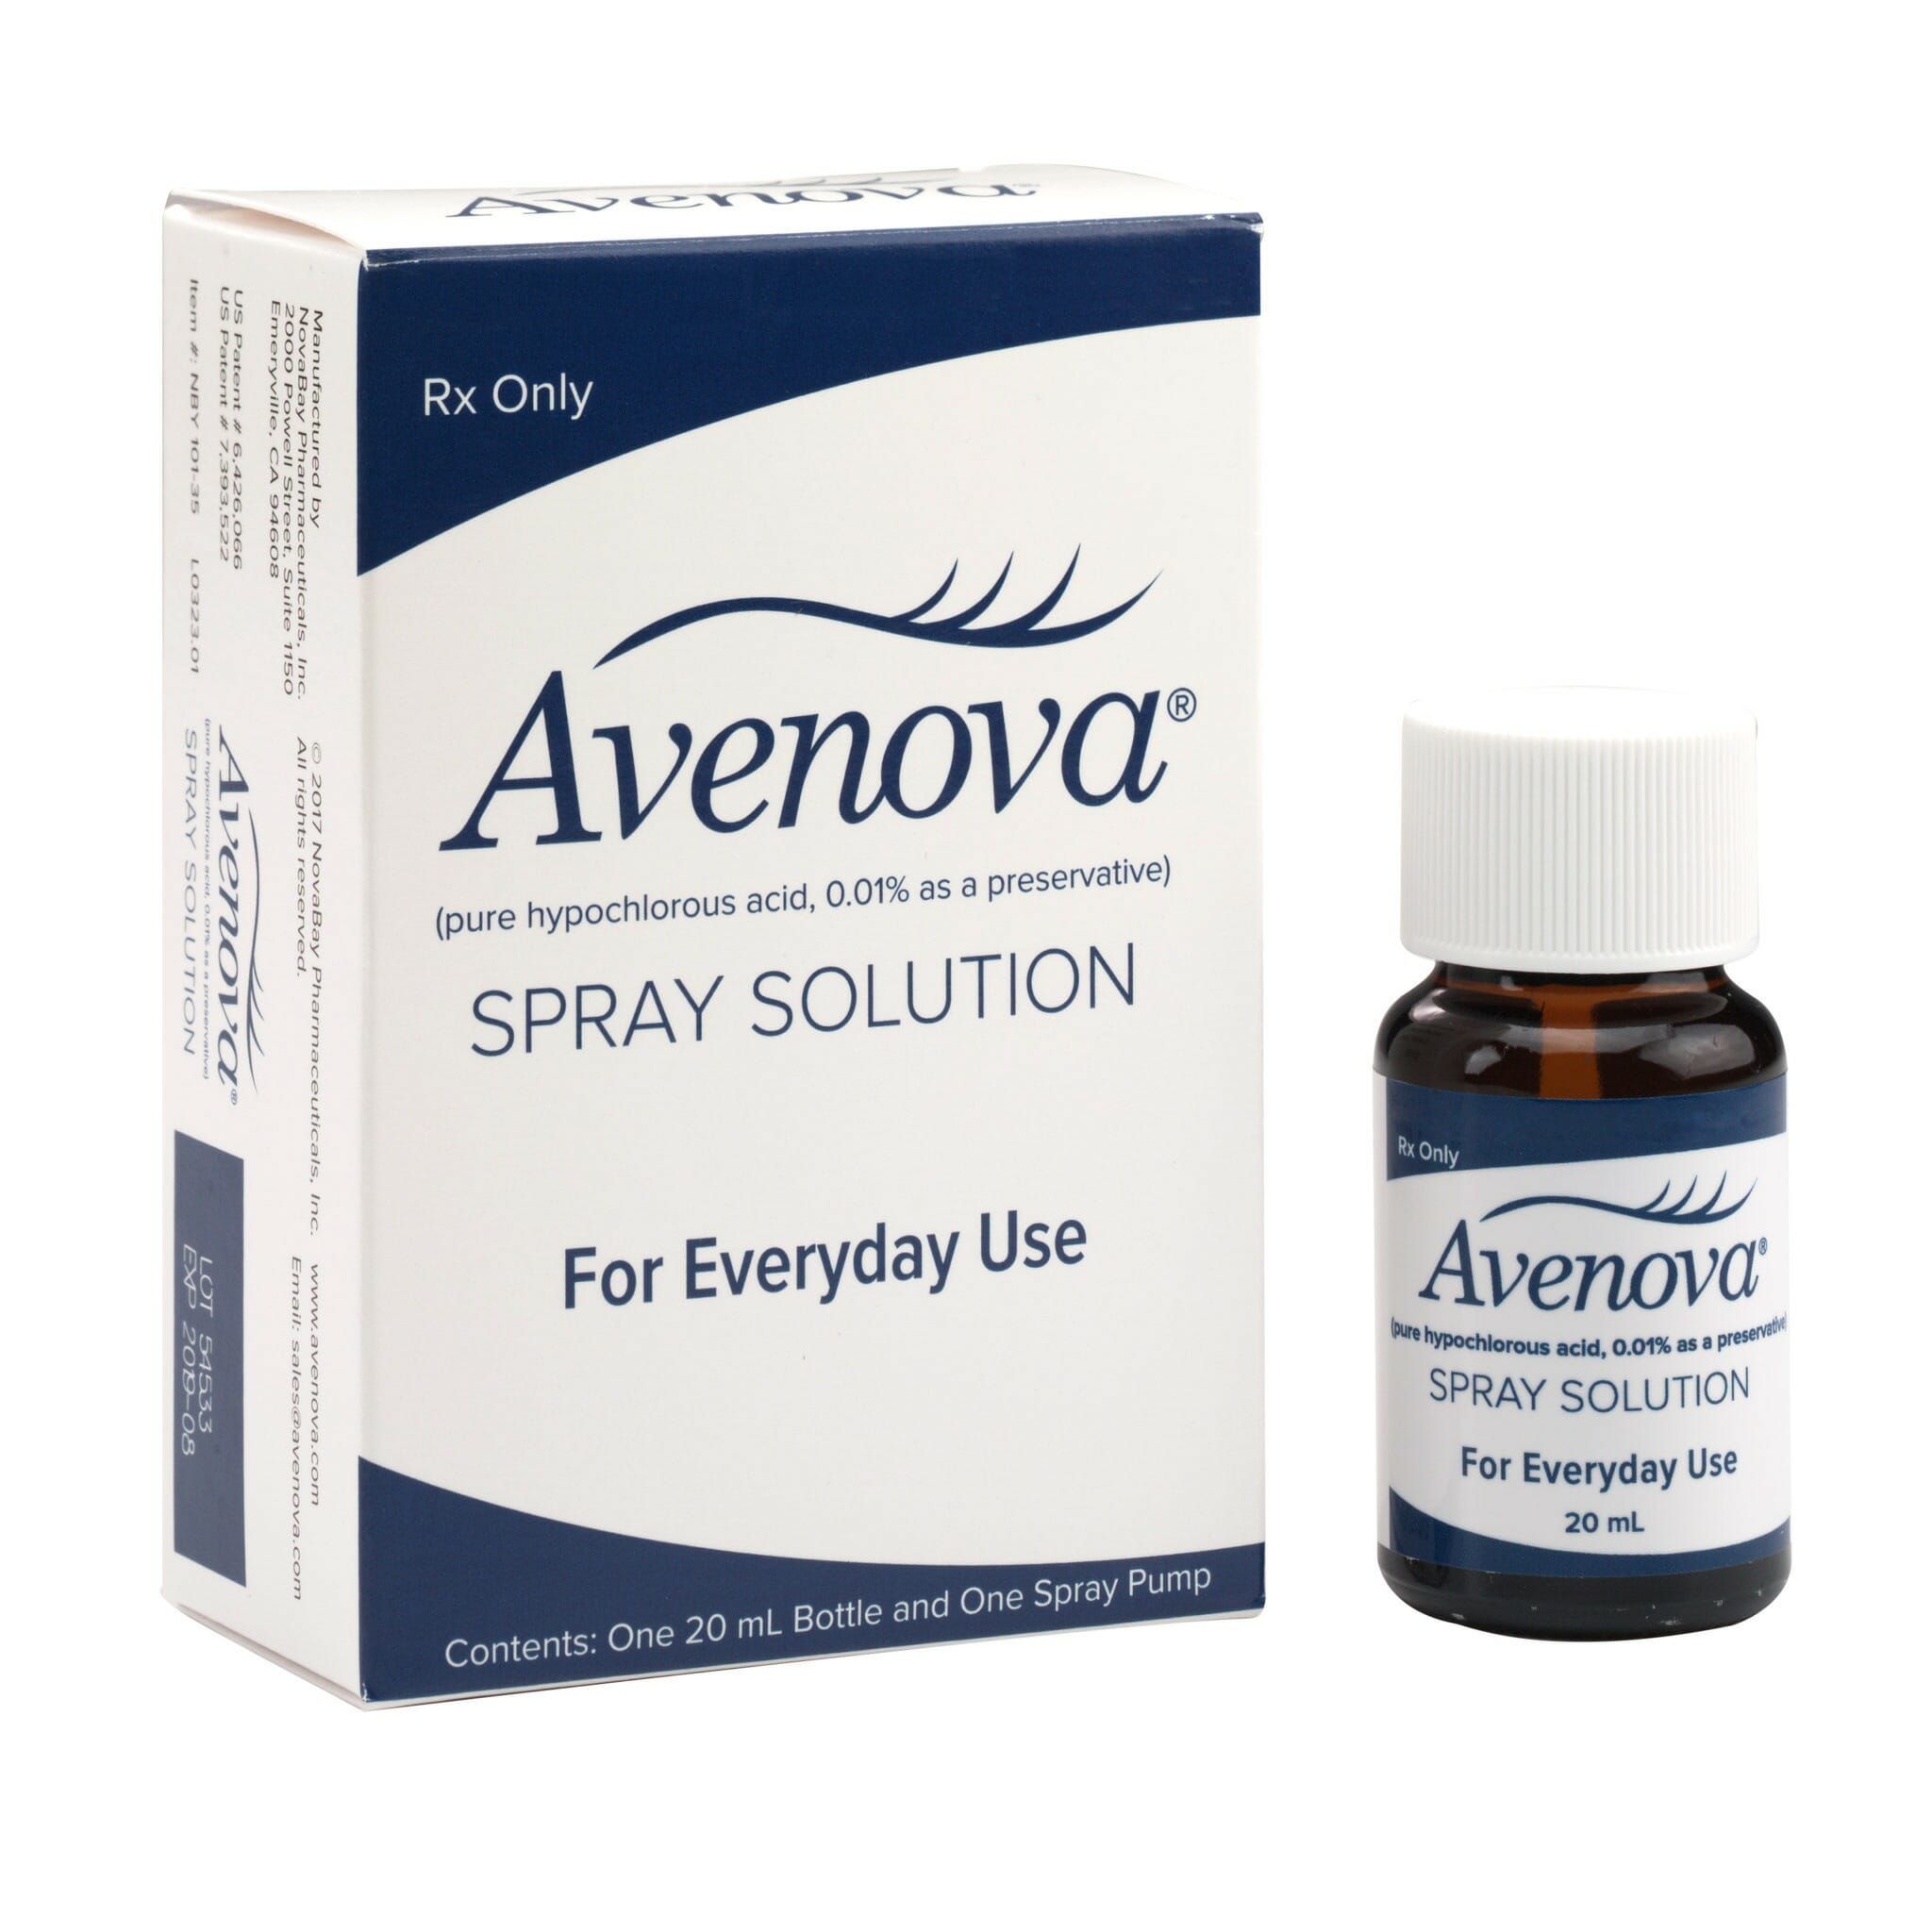 How much does the Avenova eyelid cleanser cost?